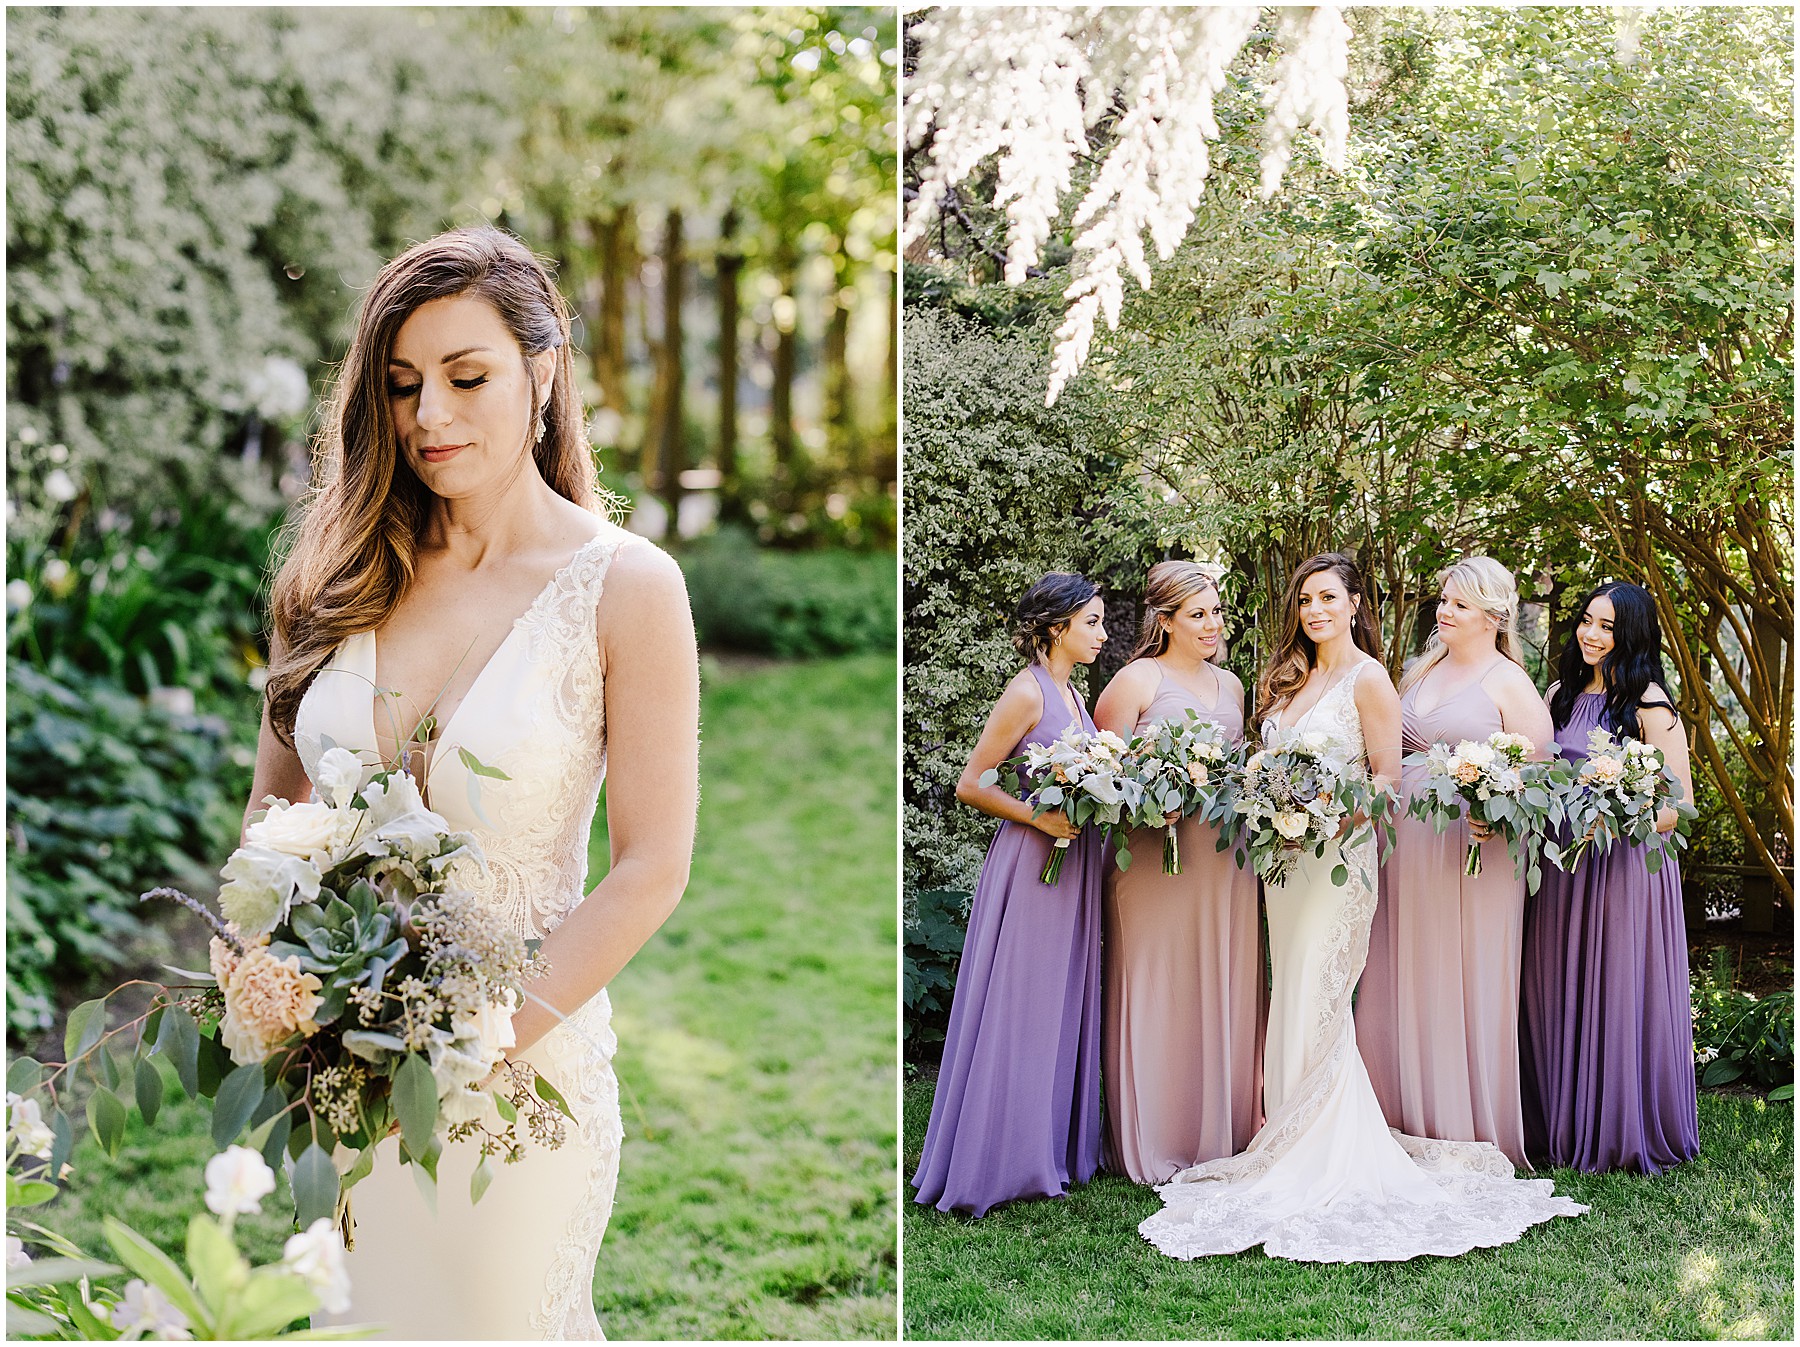 Cambria Pines Lodge Summer Wedding with Lavender, Greys, and Succulents